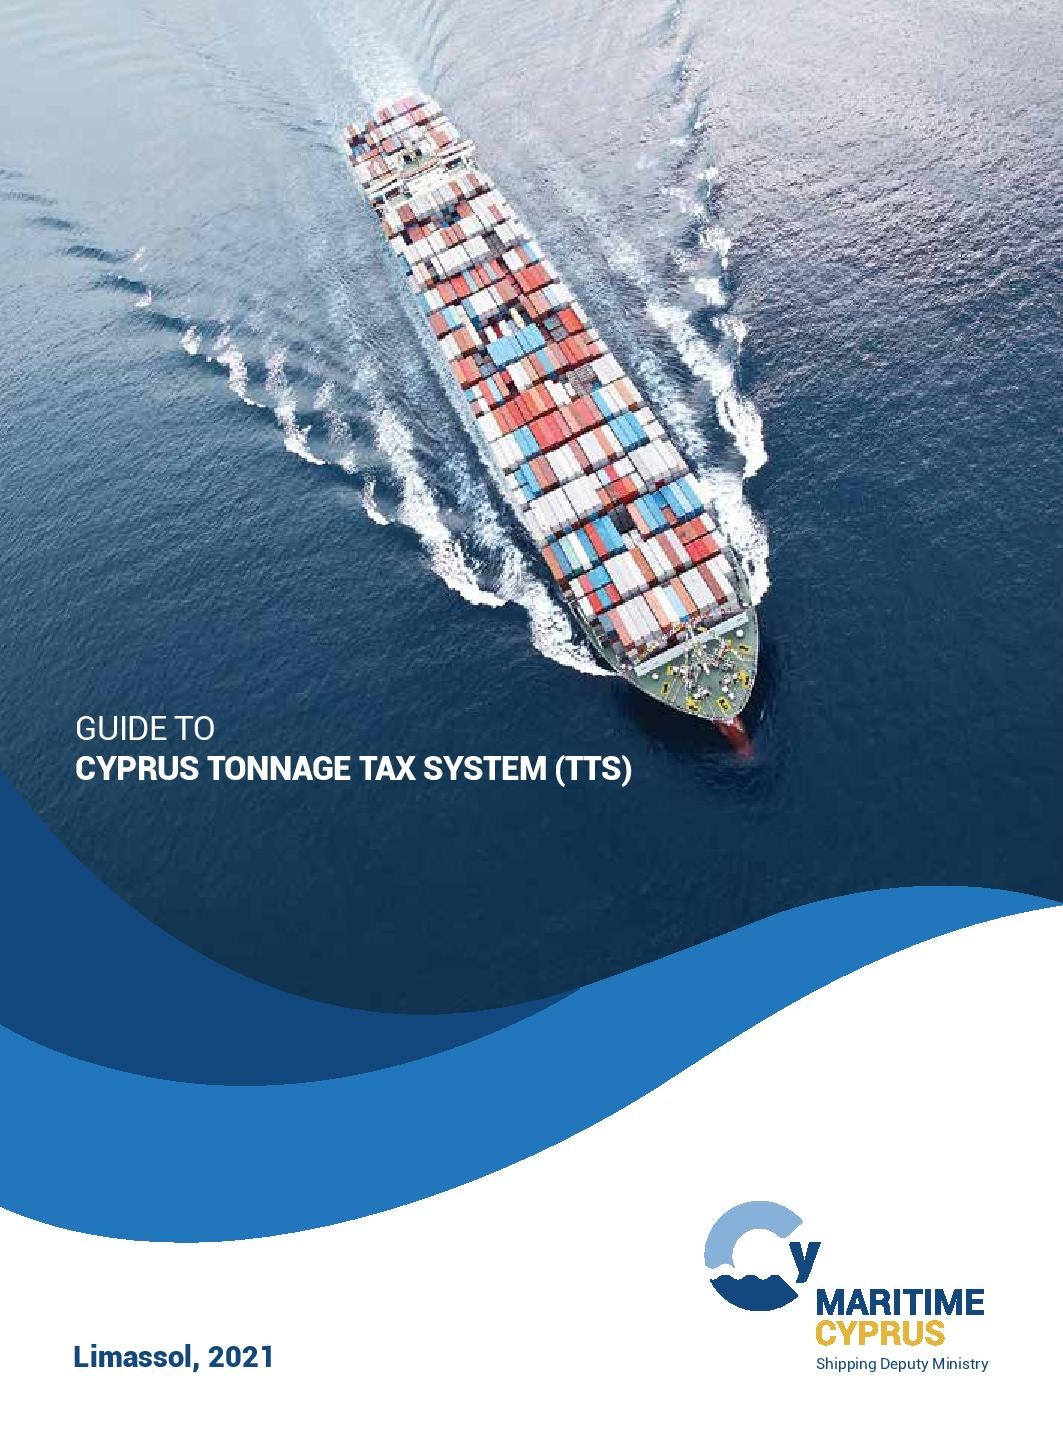 SDM: Guide to Cyprus Tonnage Tax System (TTS)